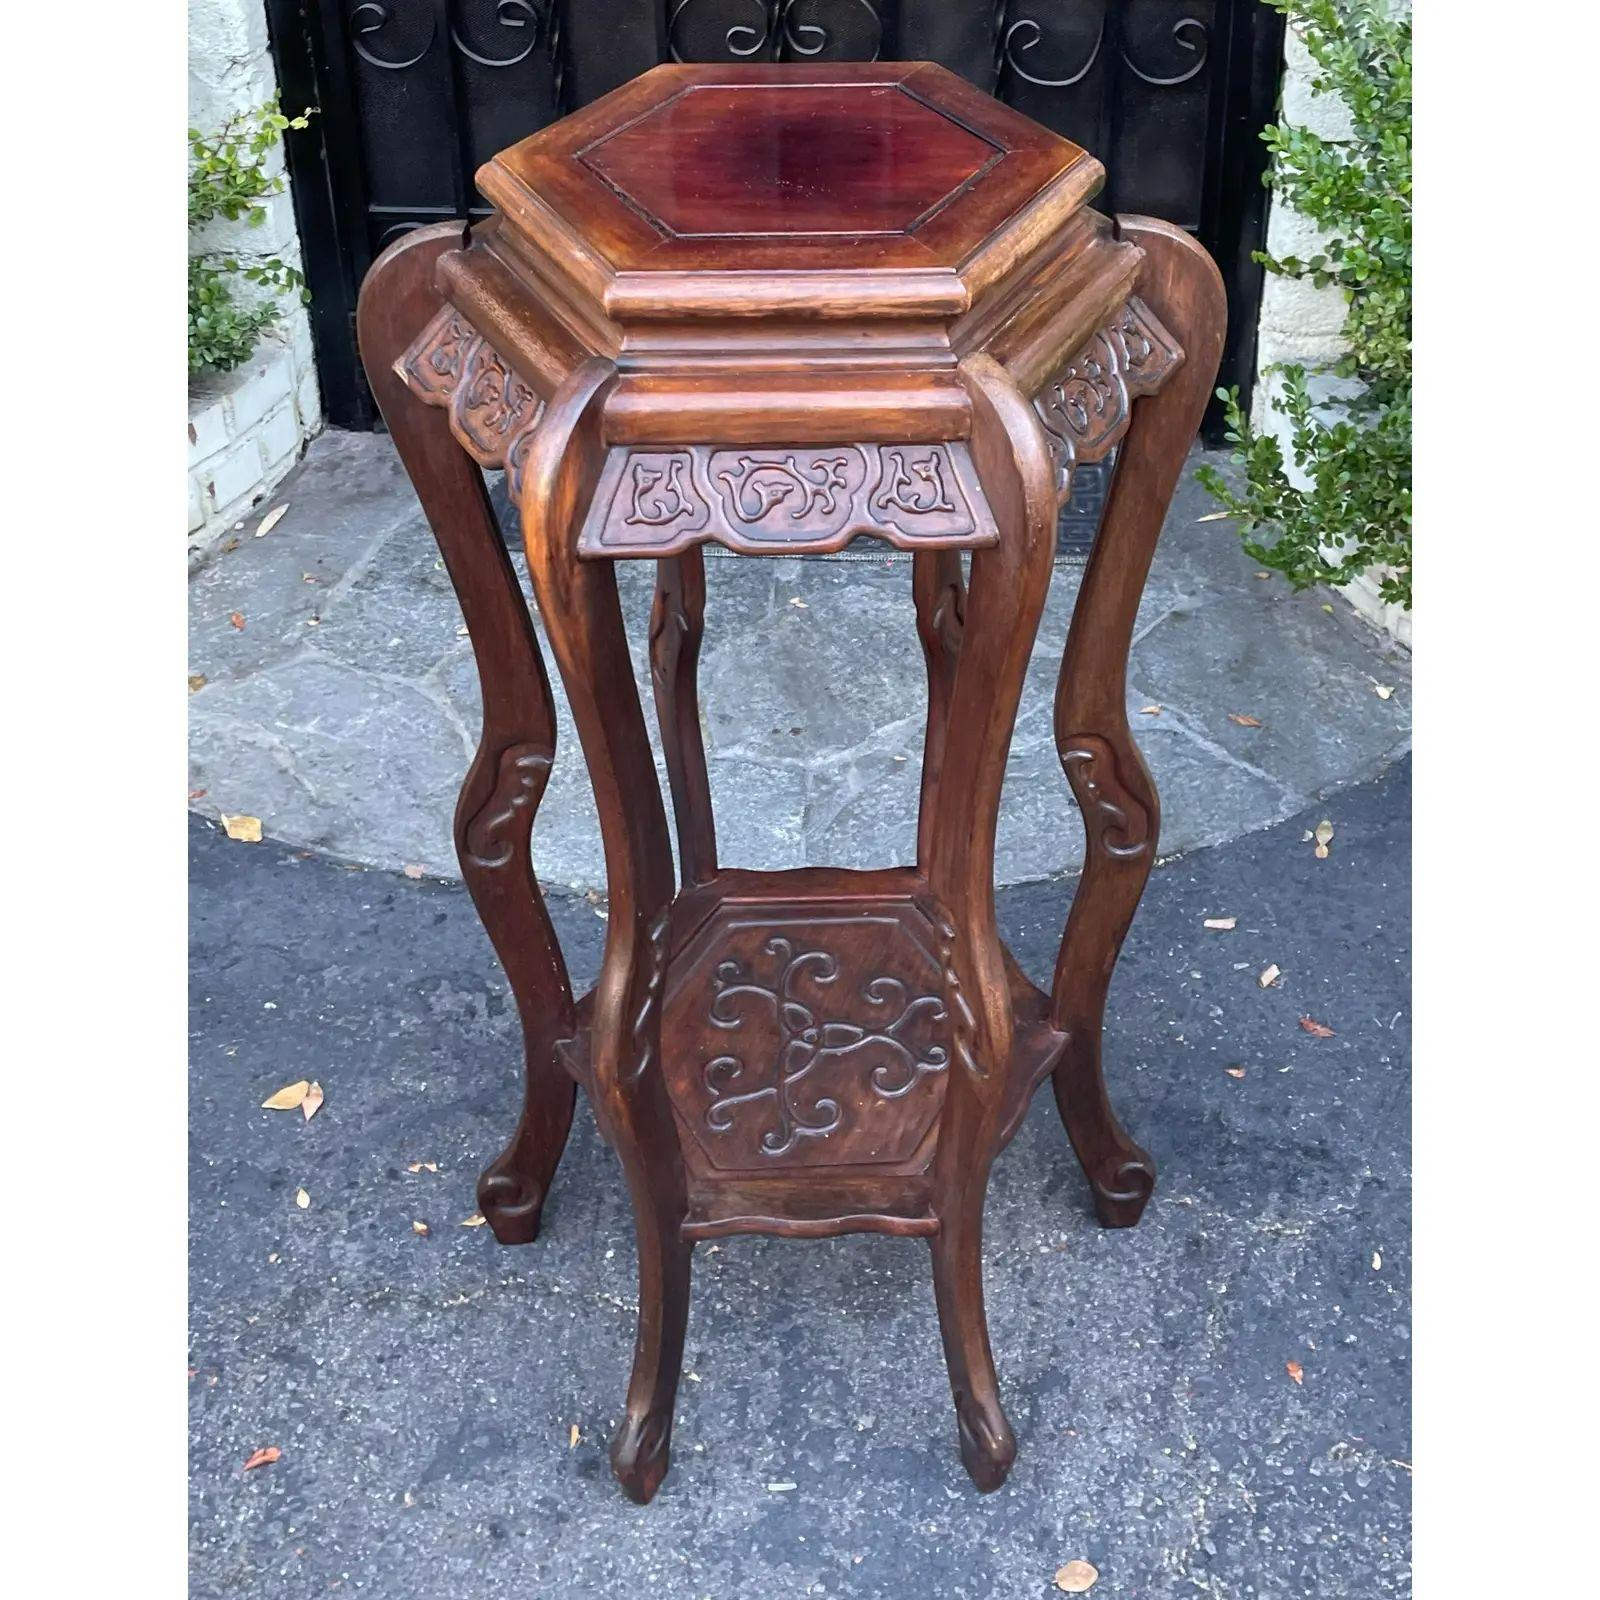 Antique Chinese rosewood pedestal plant stand/ It is beautifully carved in solid rosewood with six legs and a hexagonal top.

Additional information: 
Materials: Rosewood
Please note that this item contains materials that are legally subject to